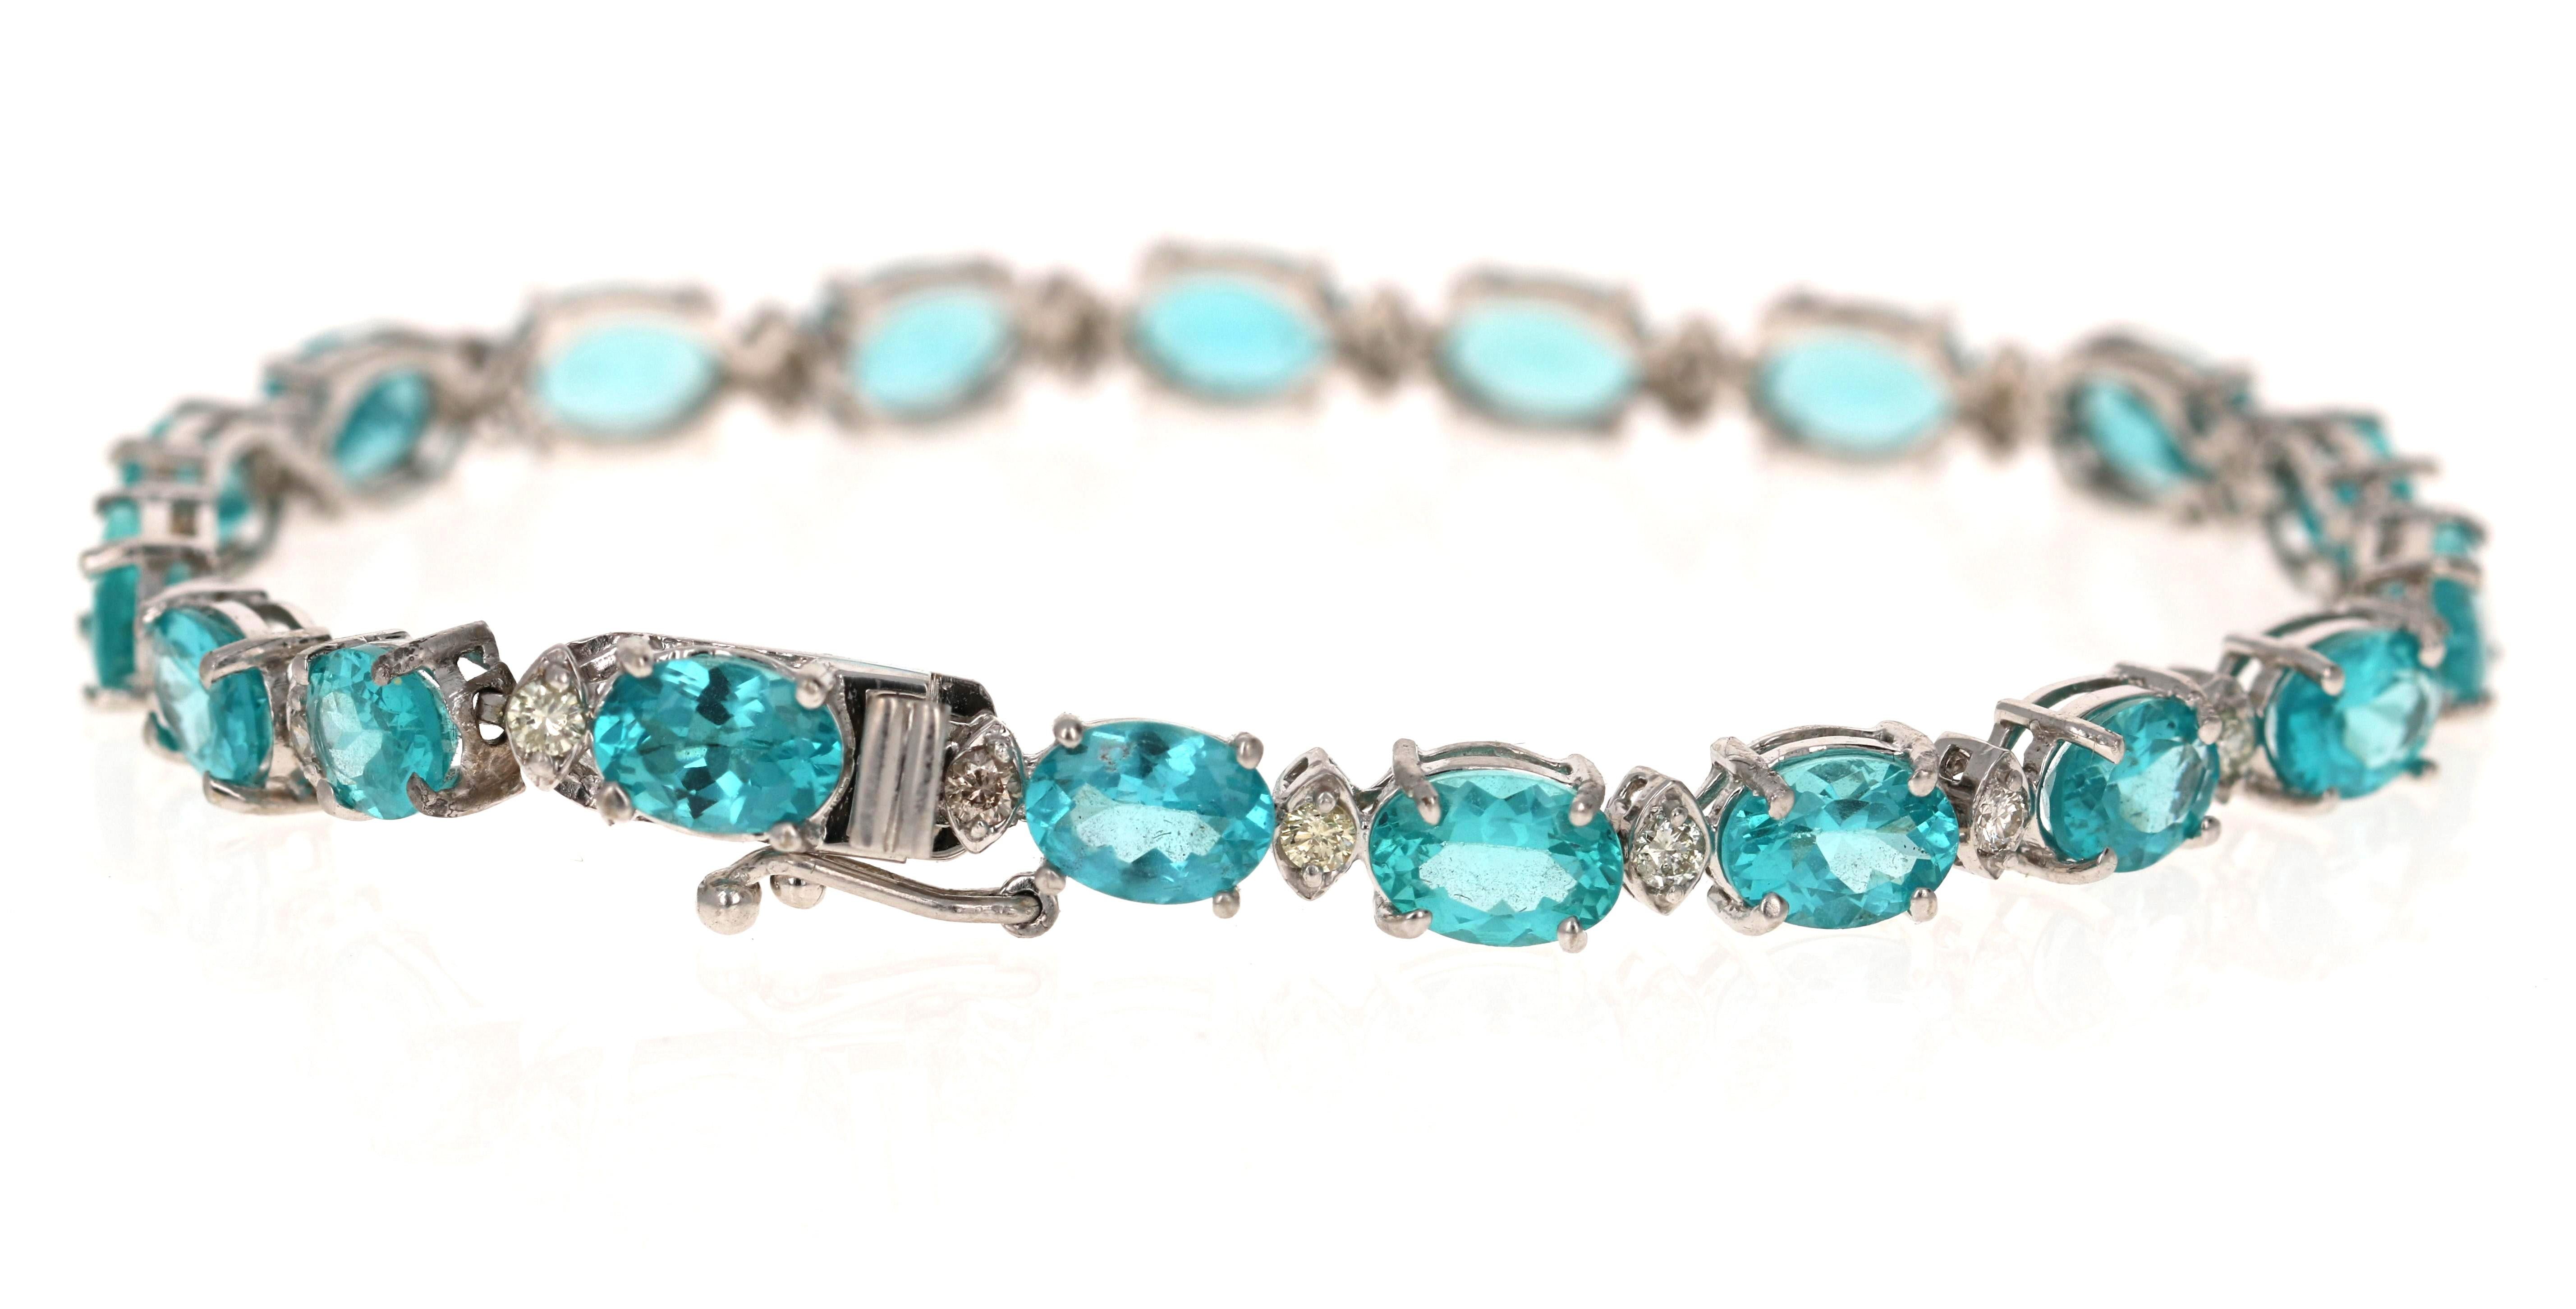 Uniquely designed 16.60 Carat Apatite Diamond White Gold Tennis Bracelet. This gorgeous piece has 19 Oval Cut Apatites that weigh a total of 15.81 Carats and 19 Round Cut Diamonds that weigh 0.79 carats. It is casted in 14K and weighs approximately